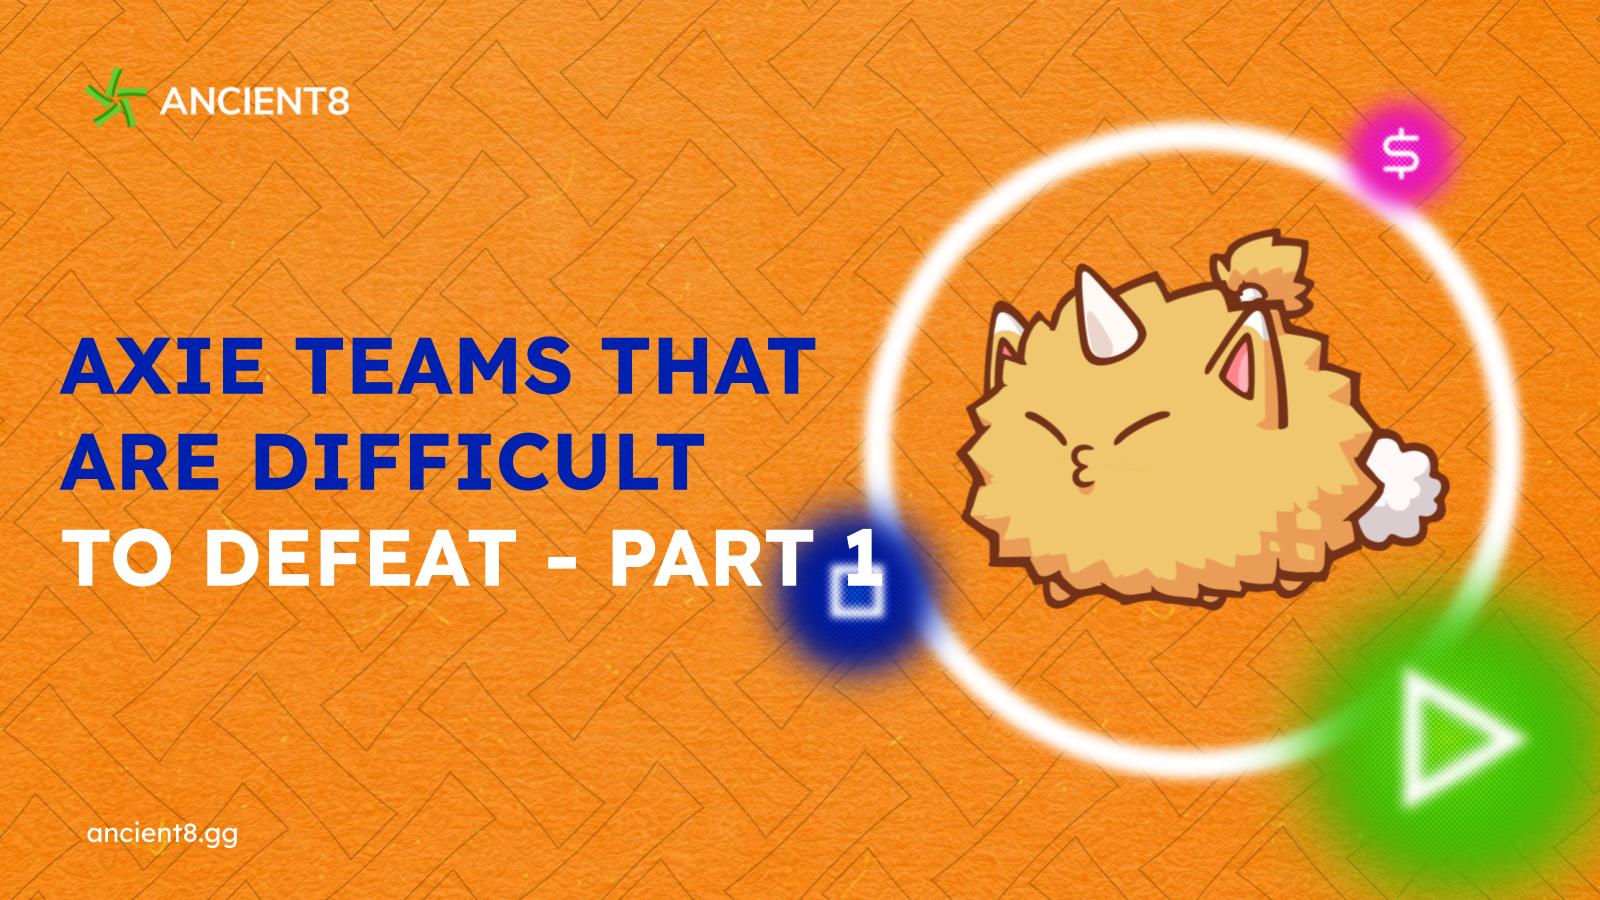 Axie Infinity teams that are difficult to defeat - Part 1